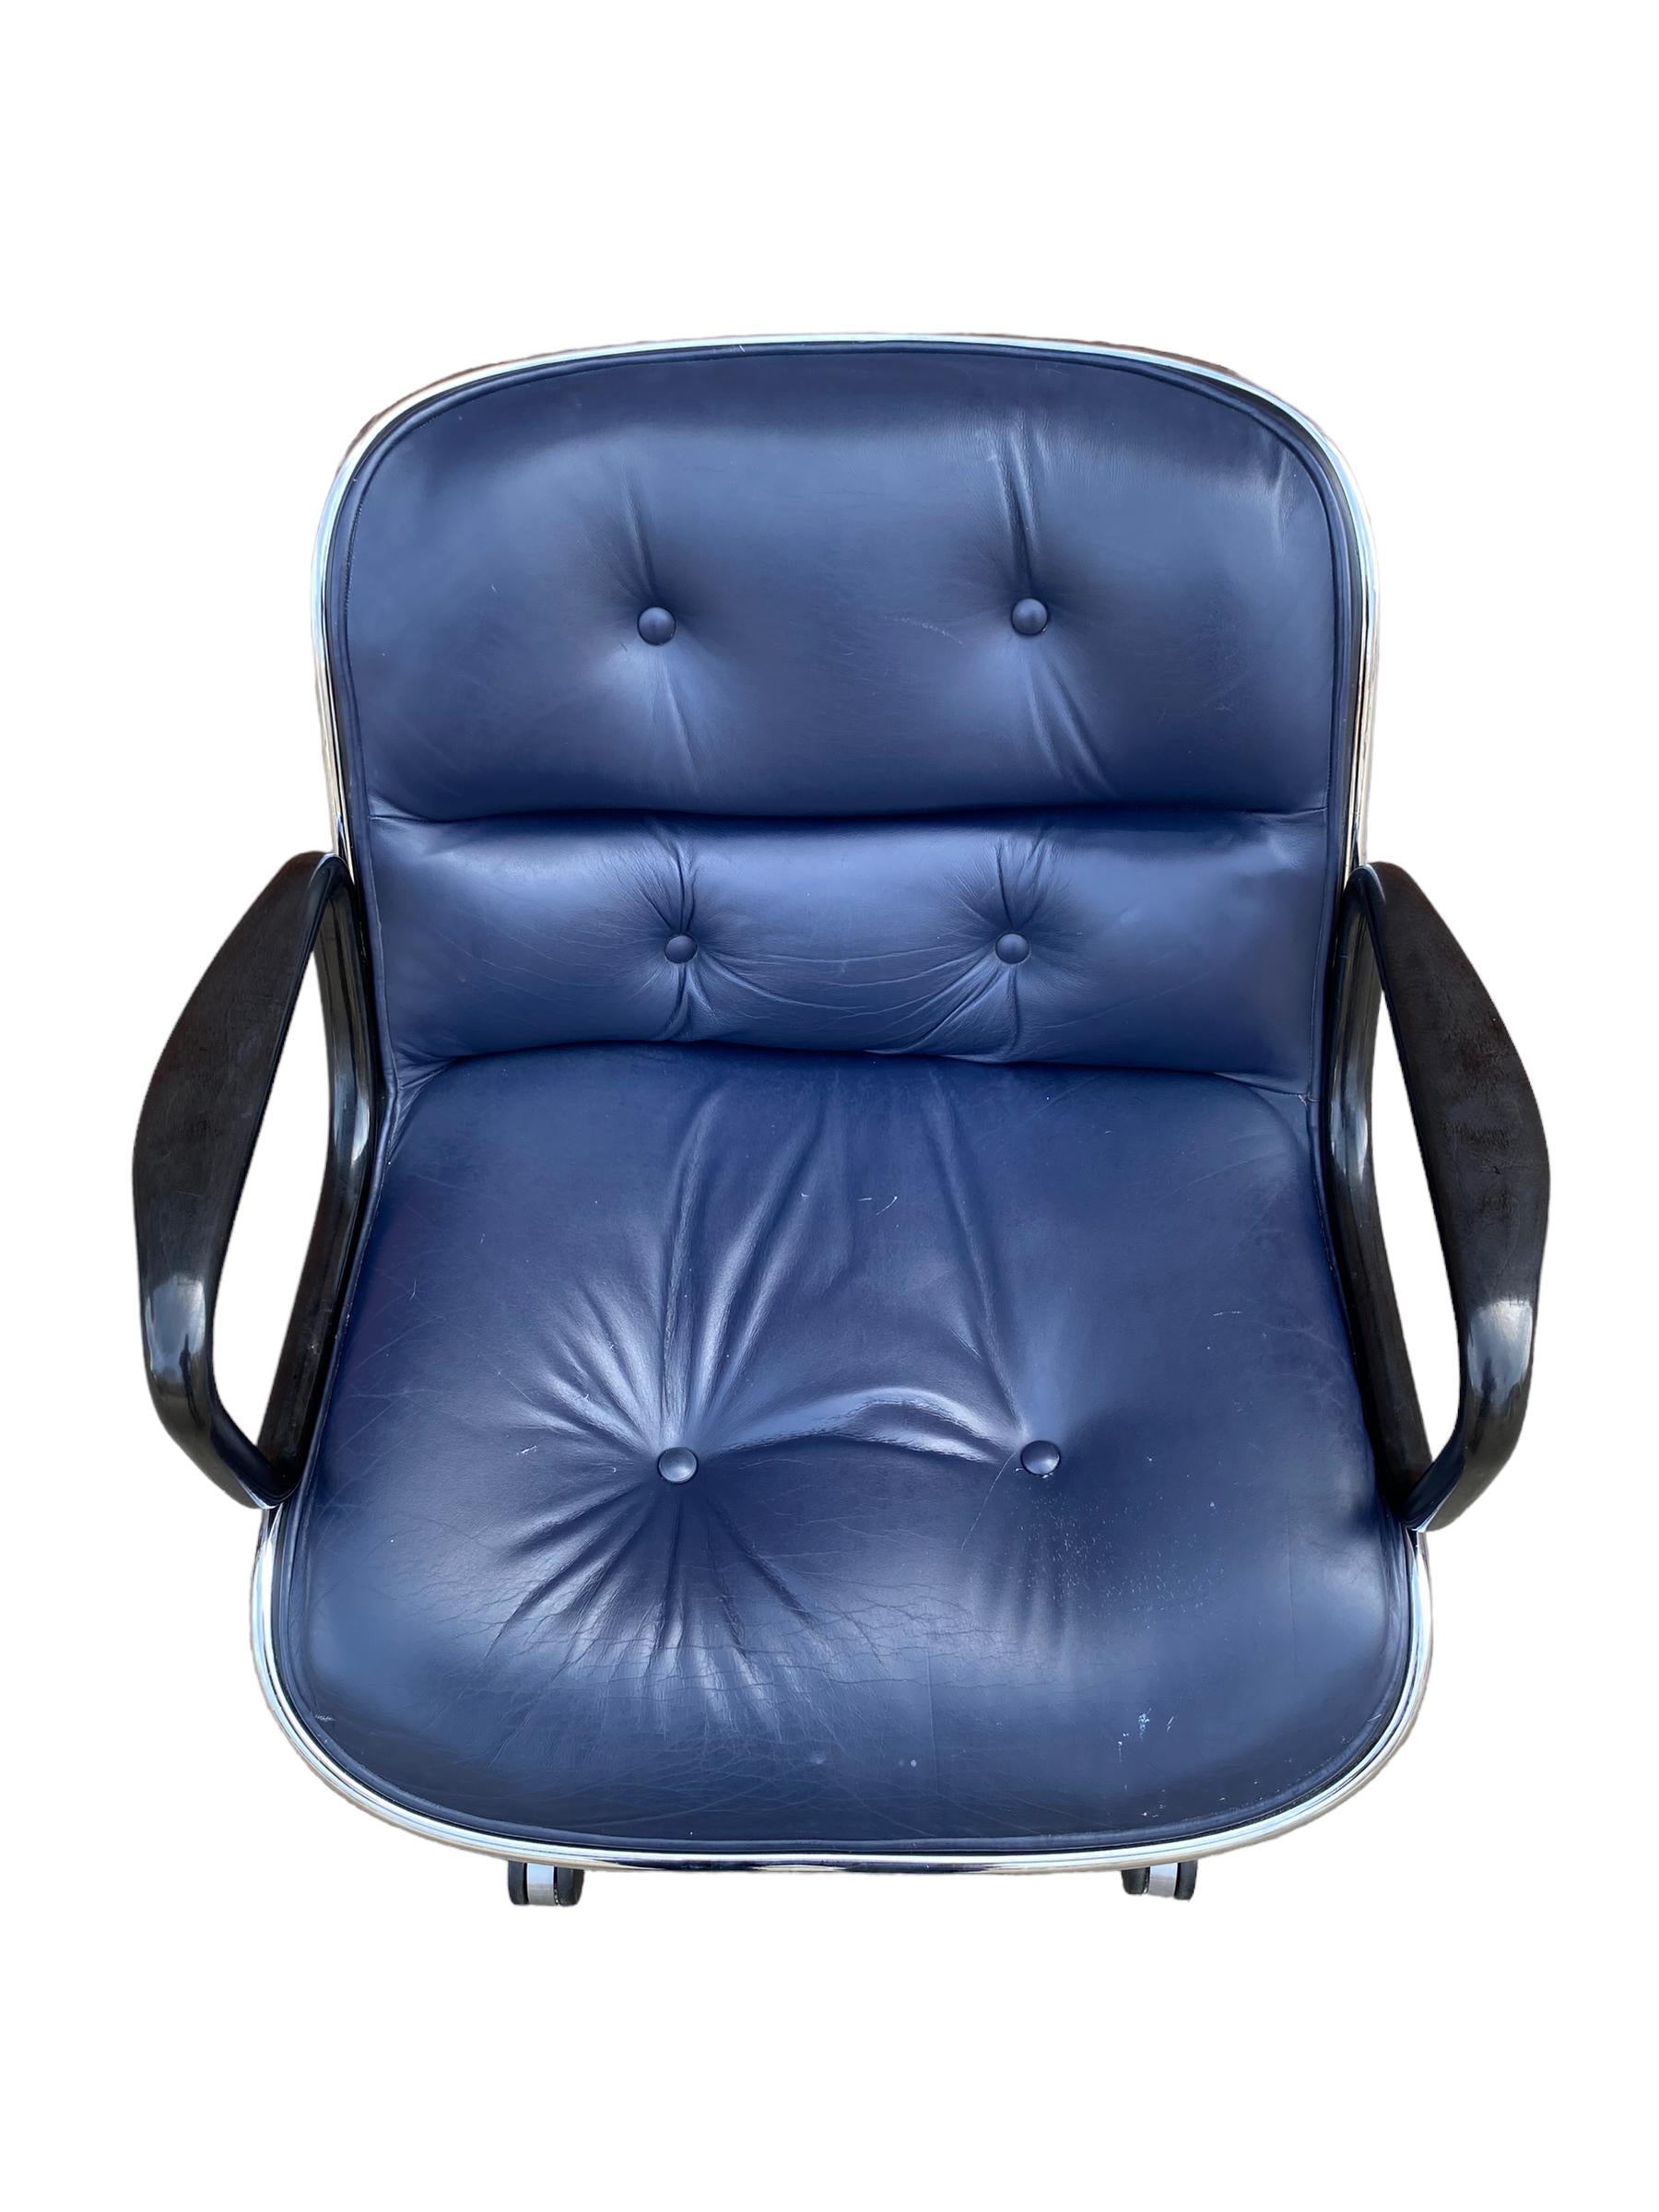 Late 20th Century Charles Pollock Desk Chair by Knoll in Navy Blue Leather For Sale